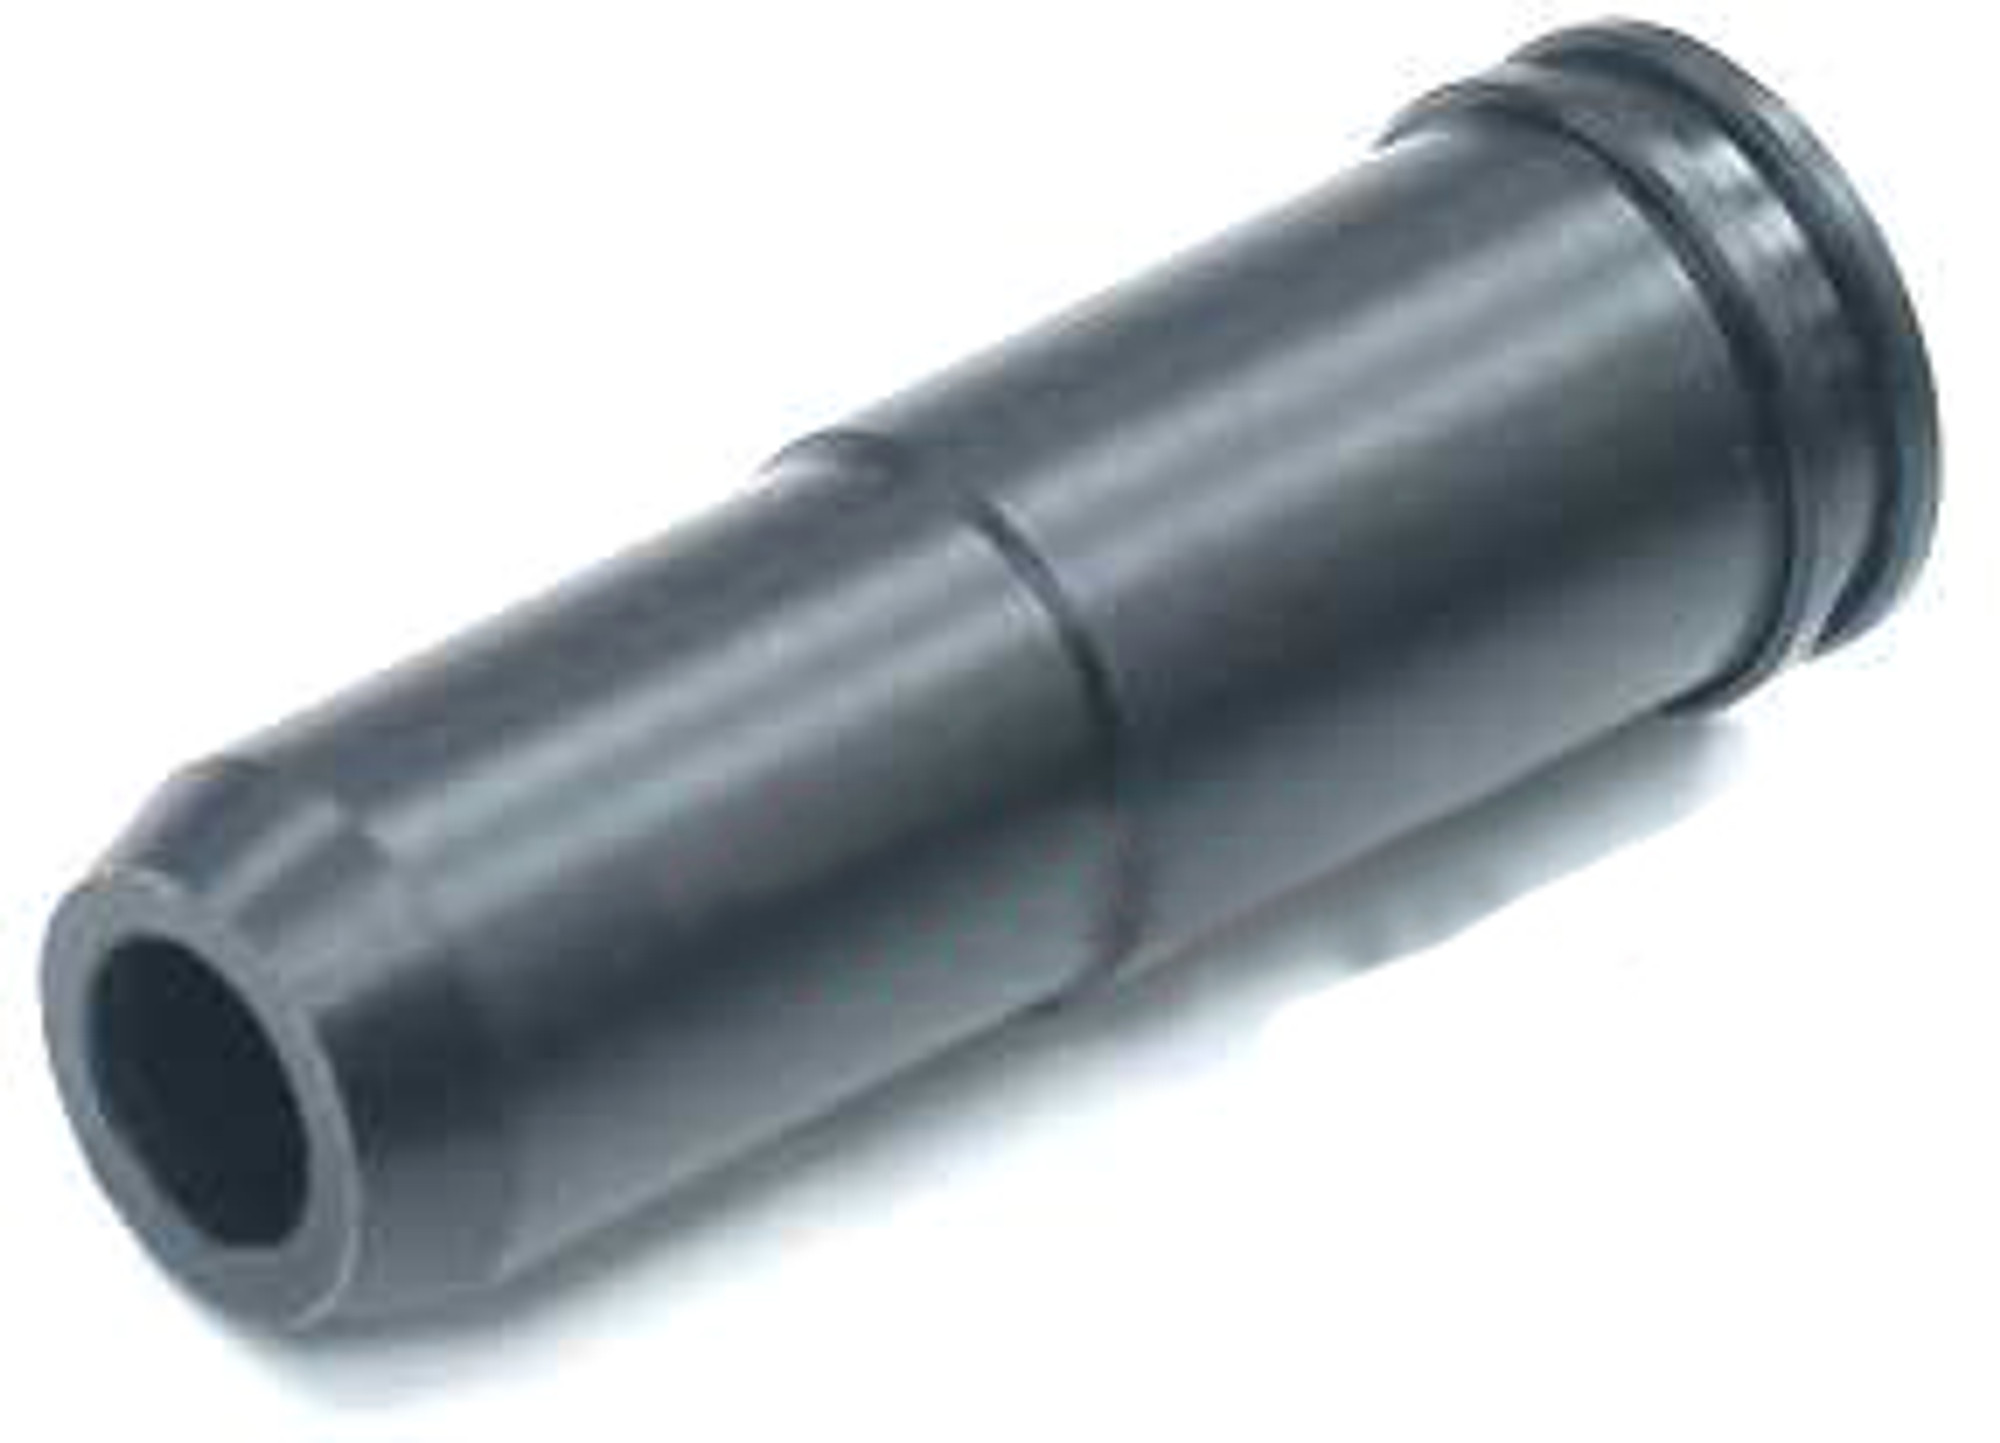 Guarder Bore-Up Air Seal Nozzle for AUG Series Airsoft AEG